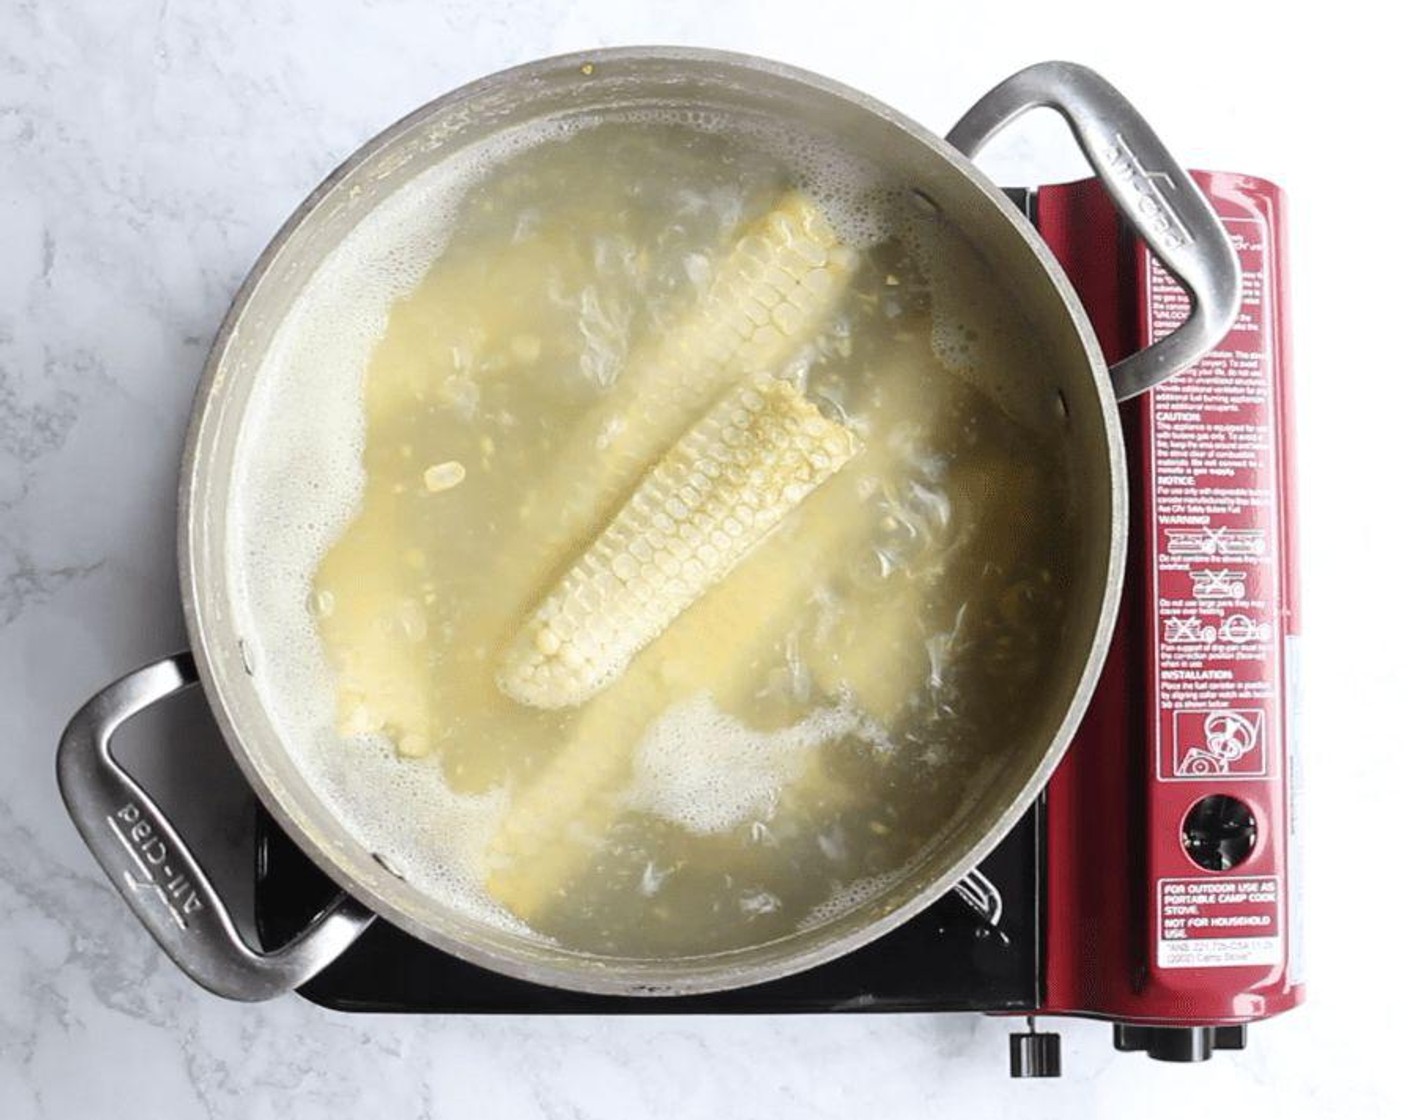 step 2 In a soup pot, quickly make a corn cob stock: cover the cobs with Water (9 cups) and bring to a boil. Reduce heat and simmer for 10 minutes, then remove the cobs. Set stock aside.